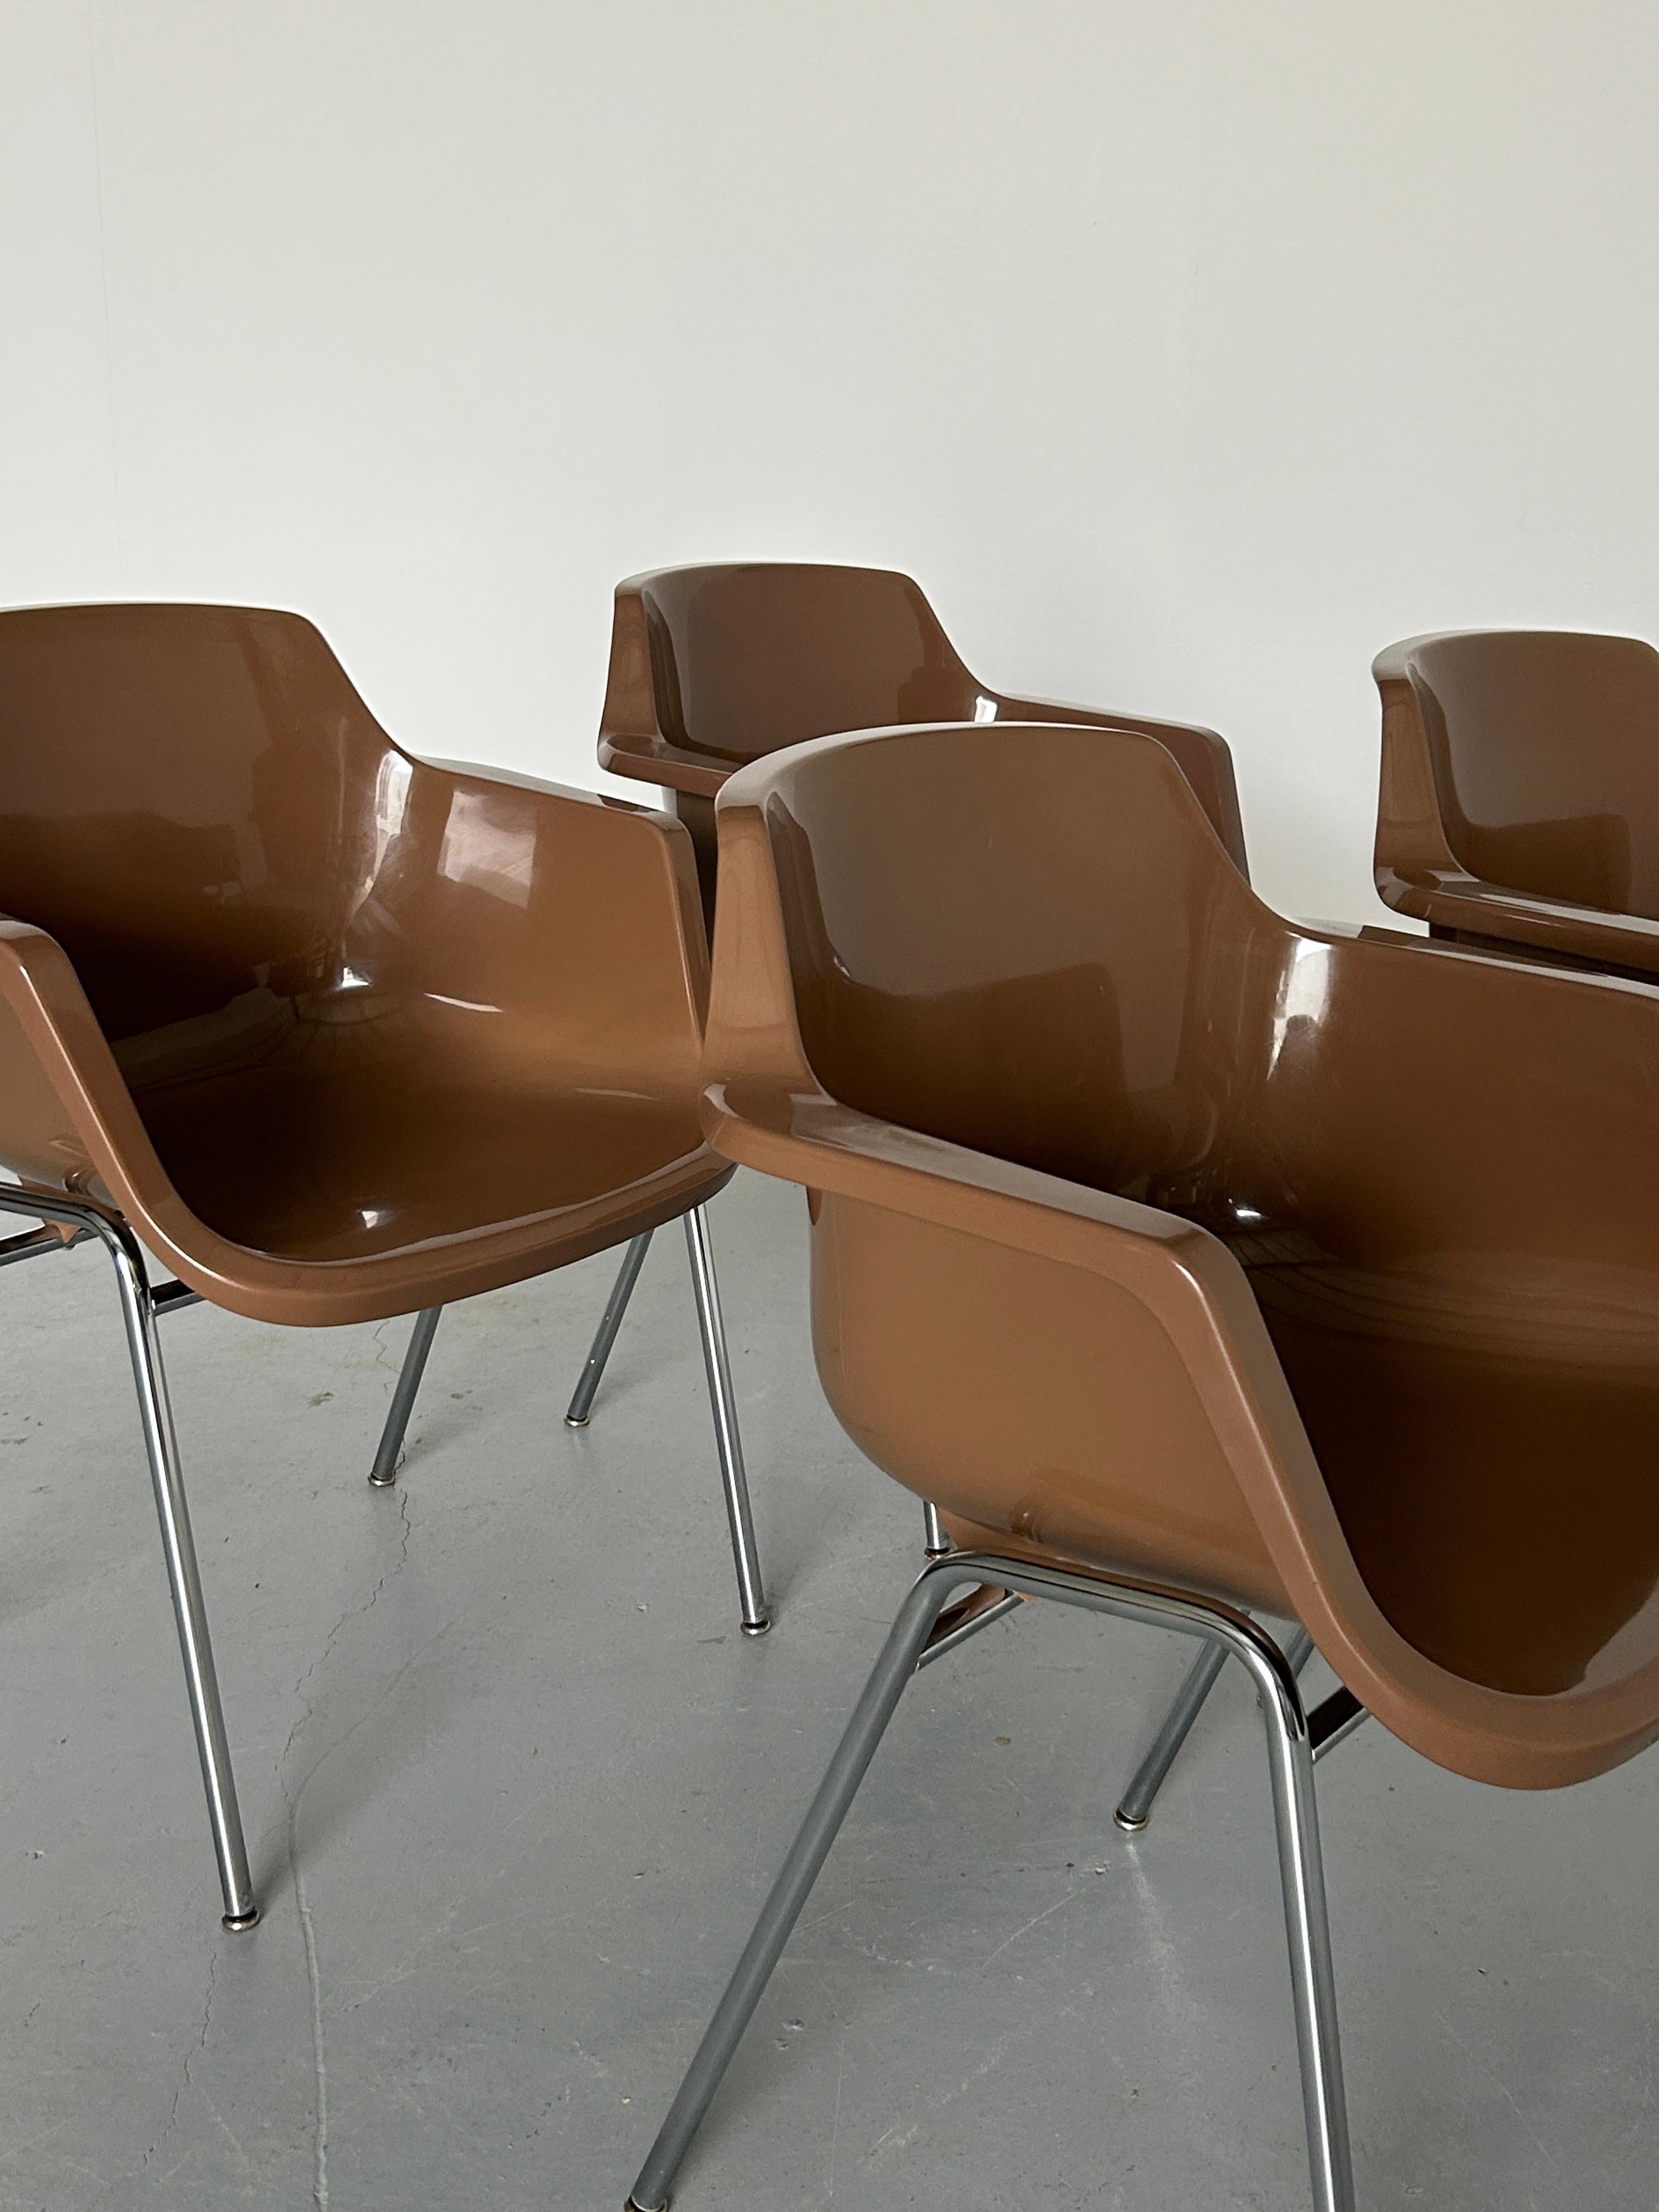 1 of 4 Vintage Mid-Century Shell Plastic Dining Chairs in style of Eames Shell  For Sale 3